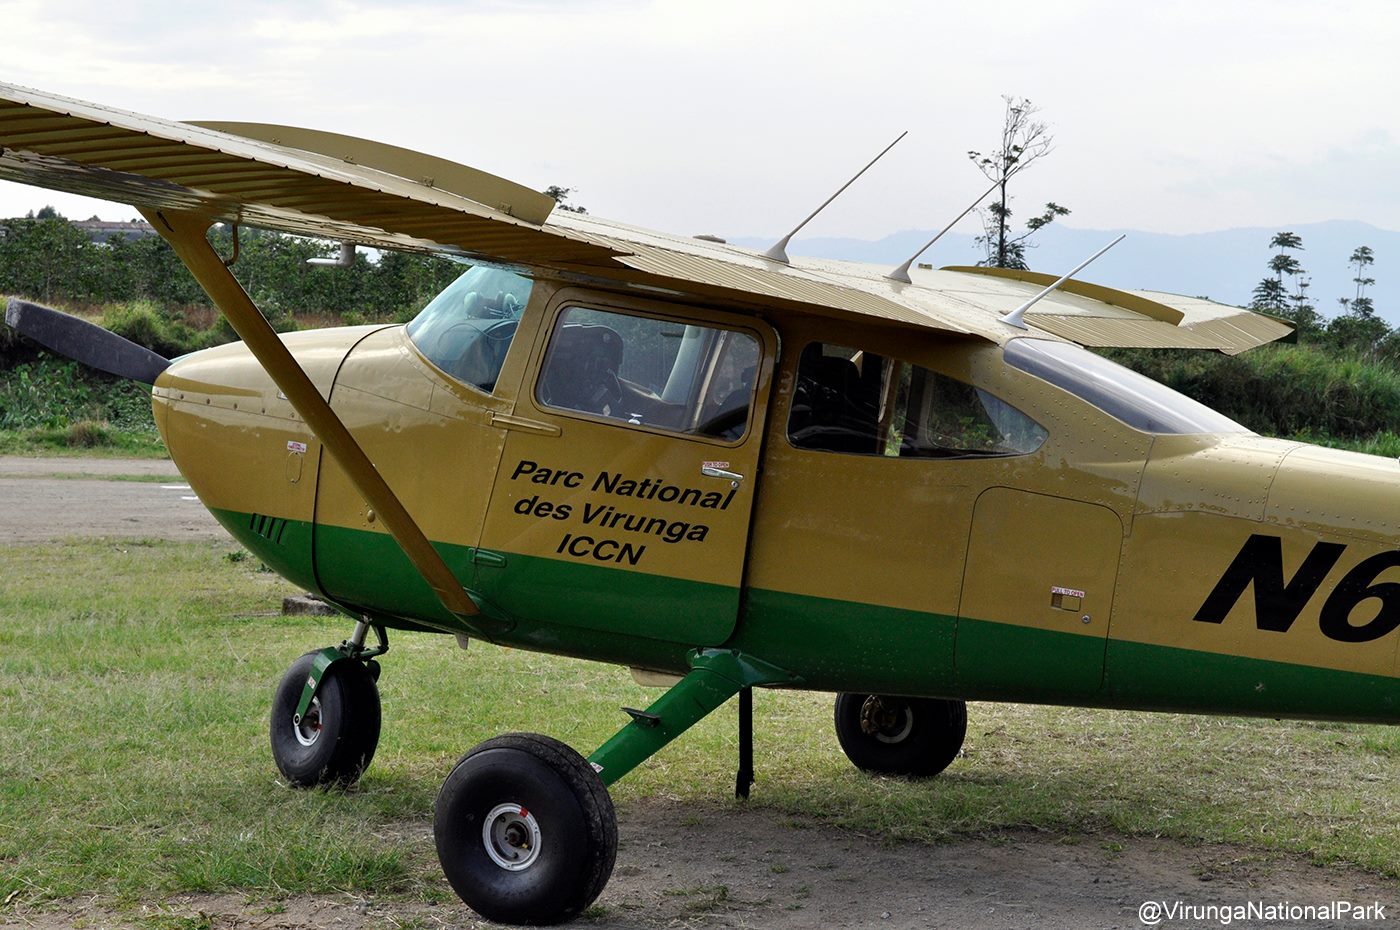 5One of two of Virungas Anti Poaching Airplanes